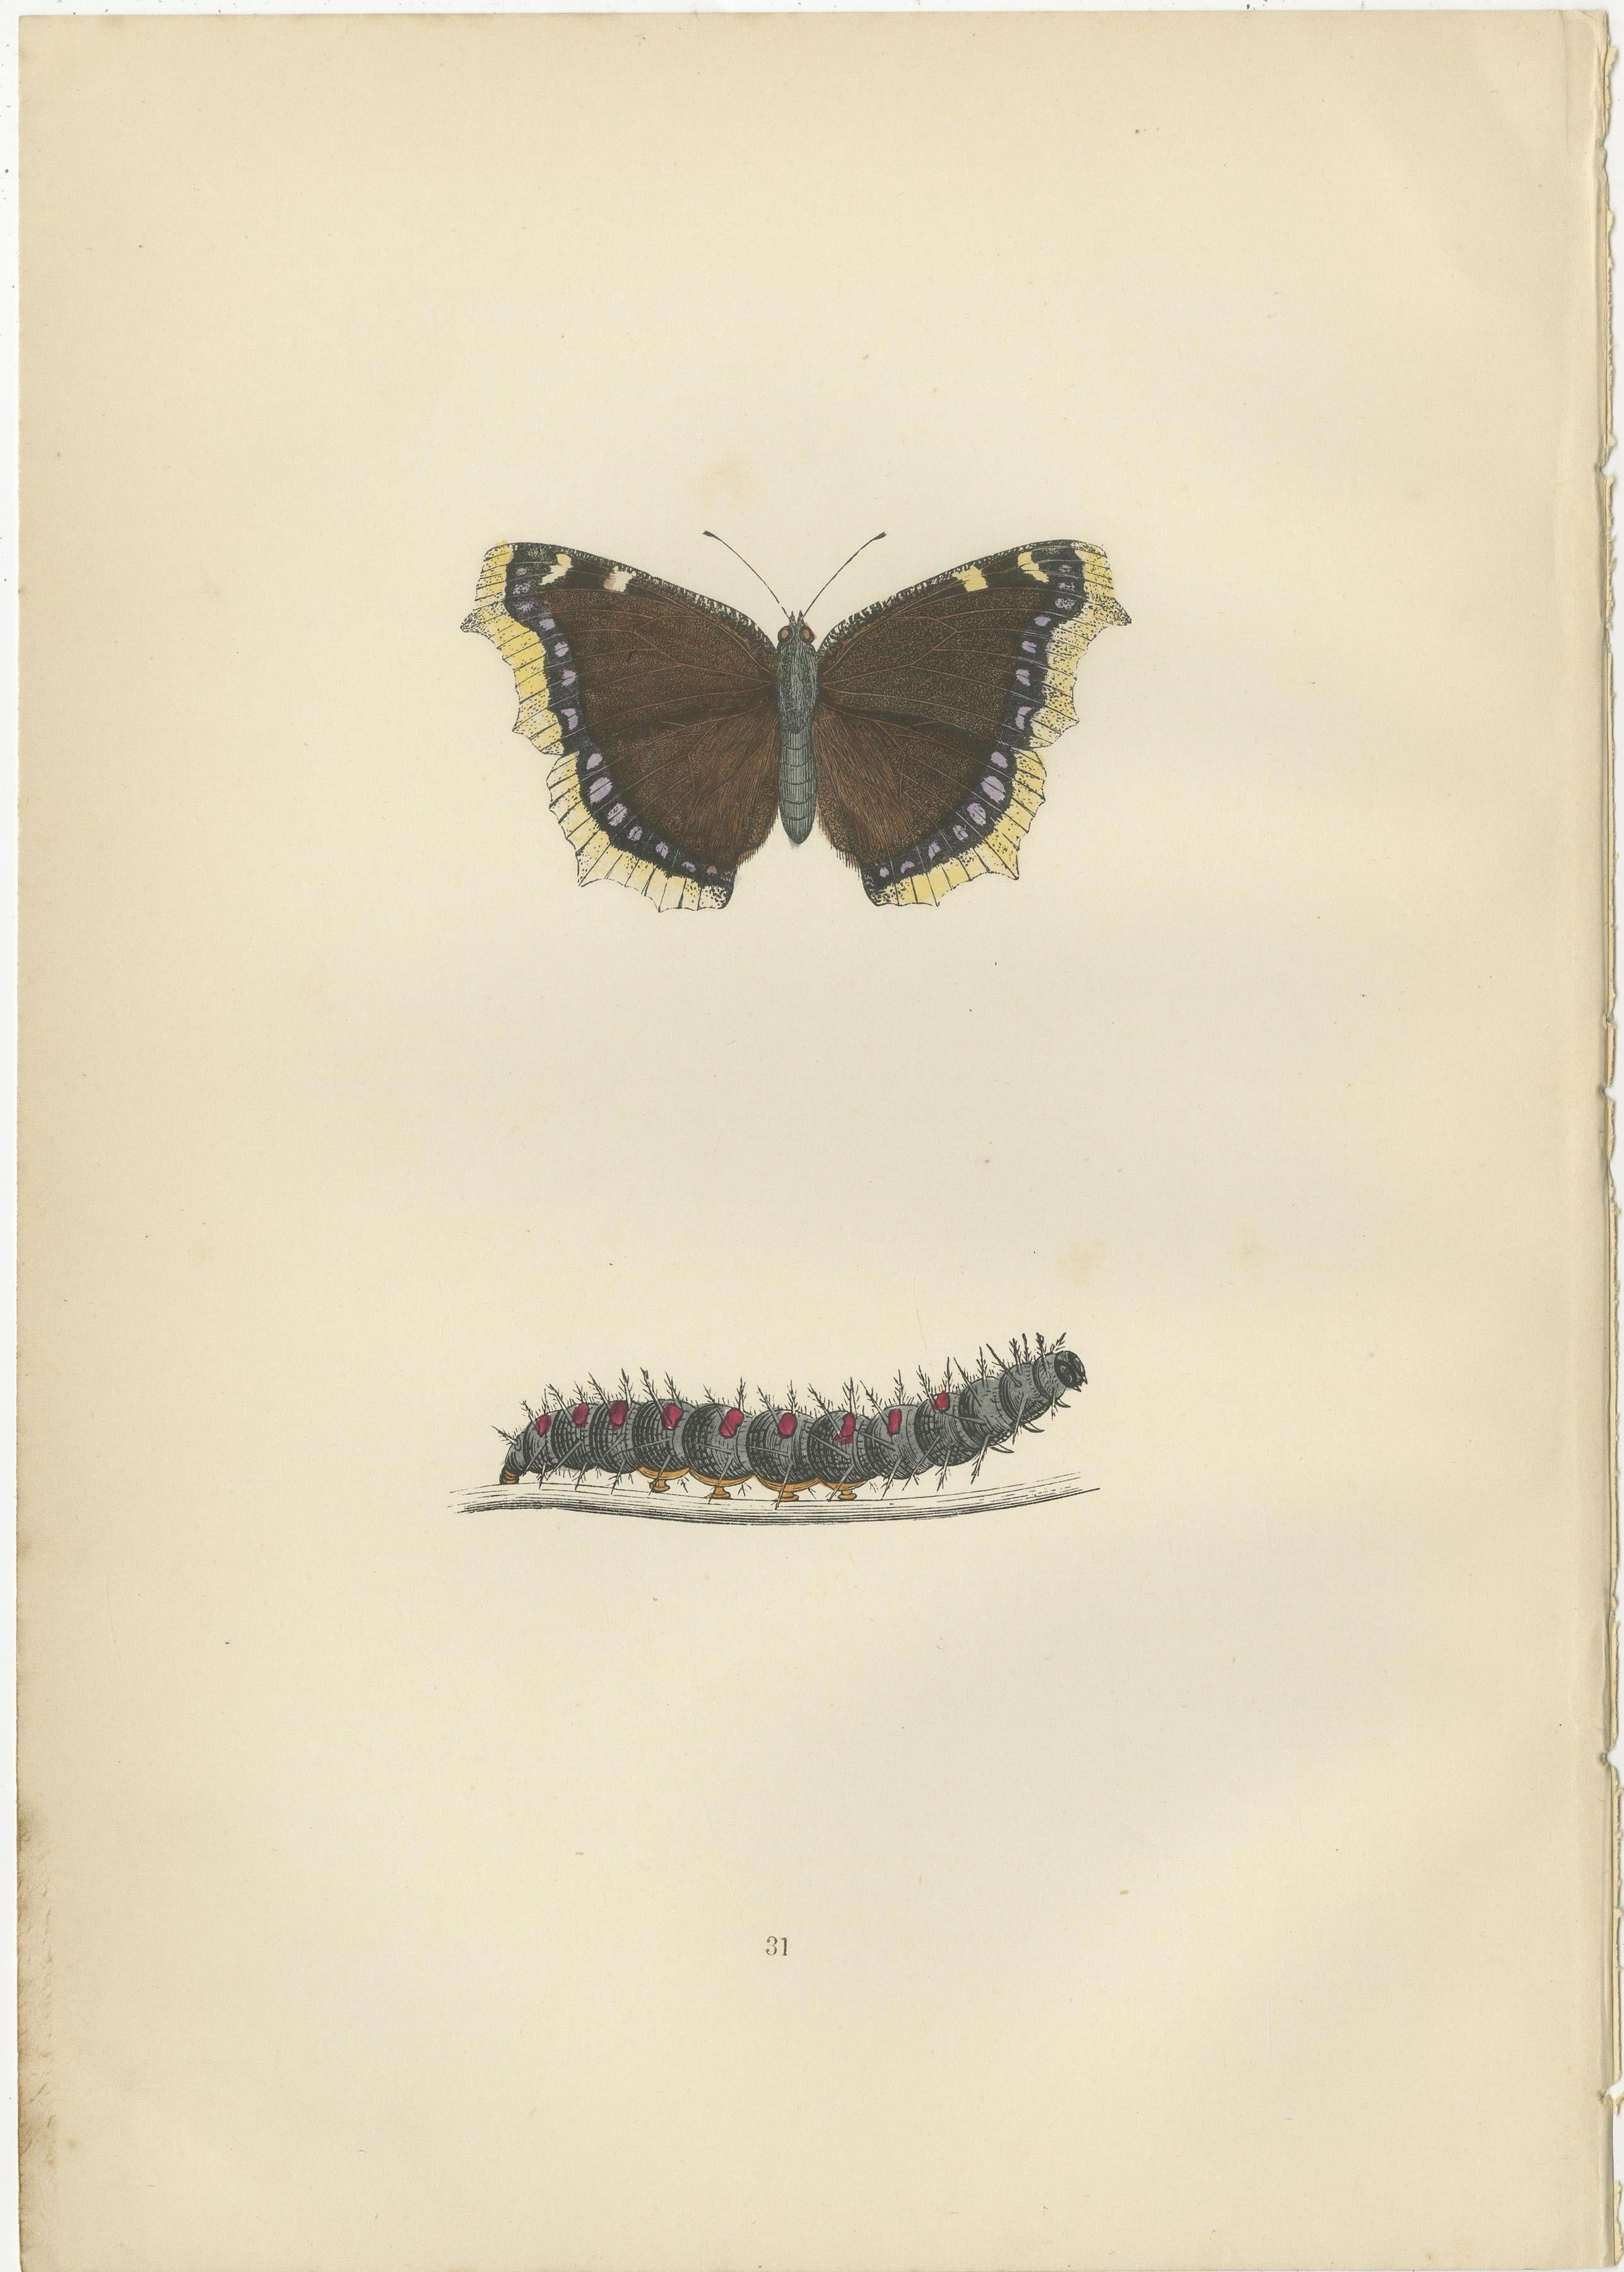 The butterflies depicted in these plates are indeed some of the more notable British species, each with distinct characteristics that make them interesting:

1. **Camberwell Beauty (Nymphalis antiopa)**: This is a large butterfly characterized by